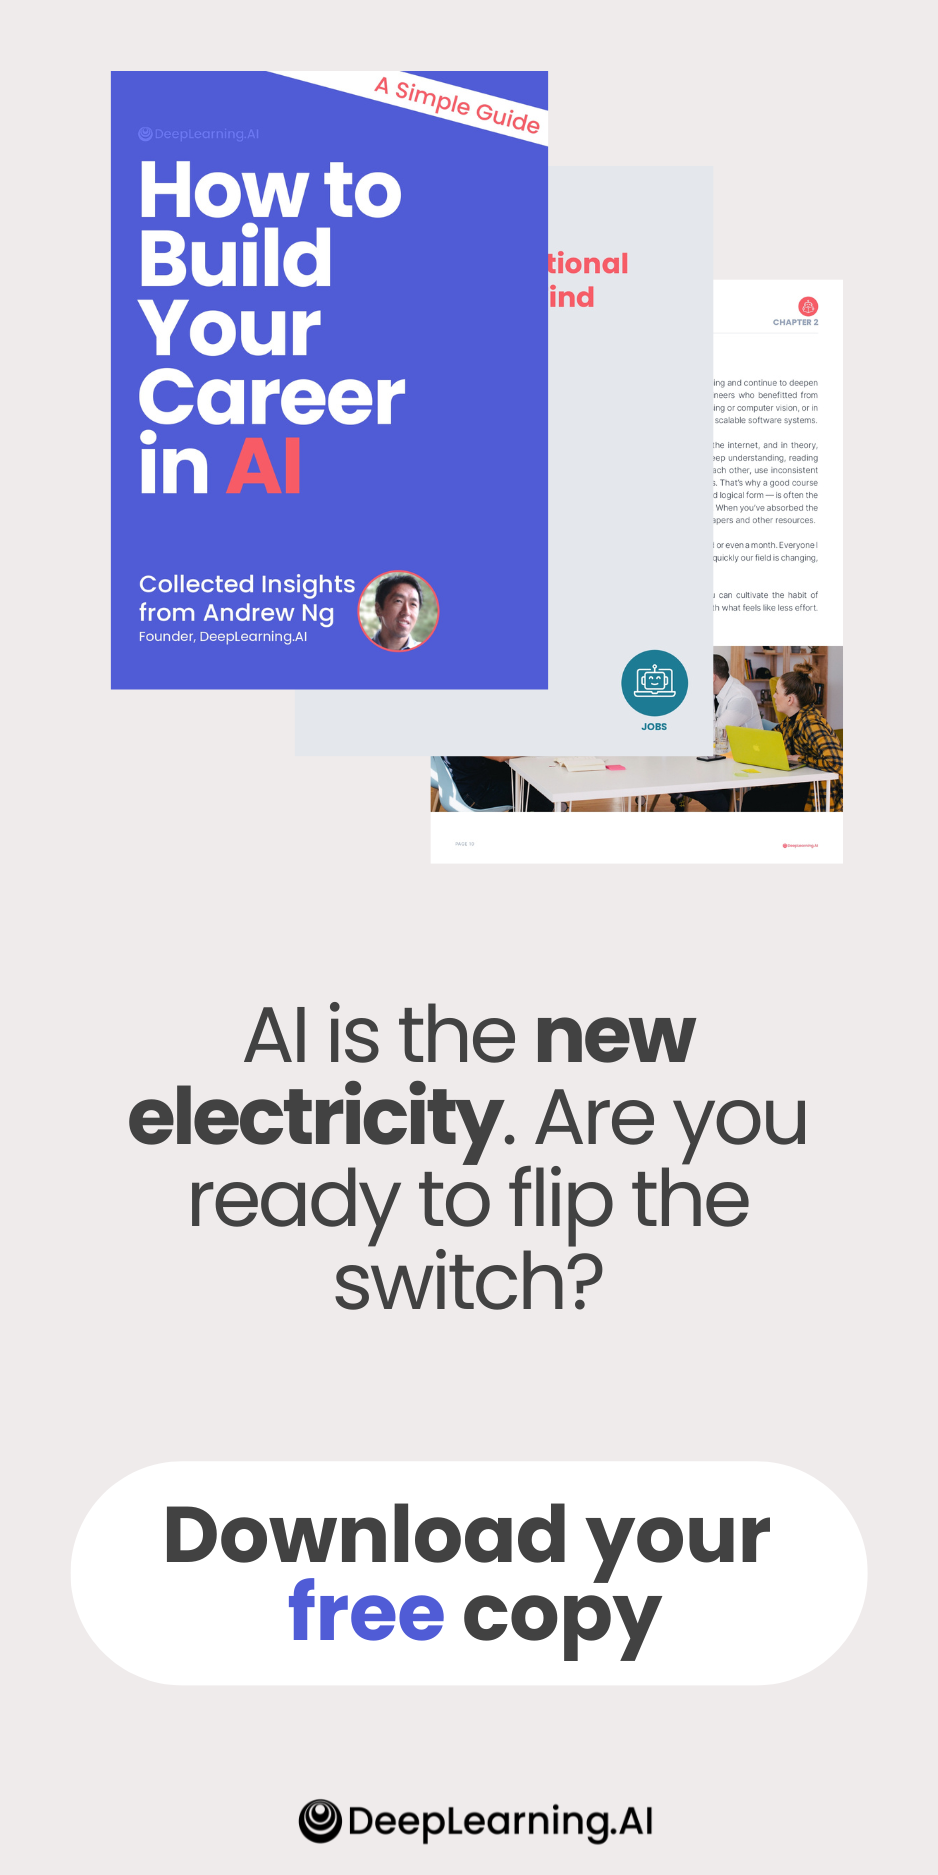 AI is the new electricity. Are you ready to flip the switch? Download your free copy of the ebook.